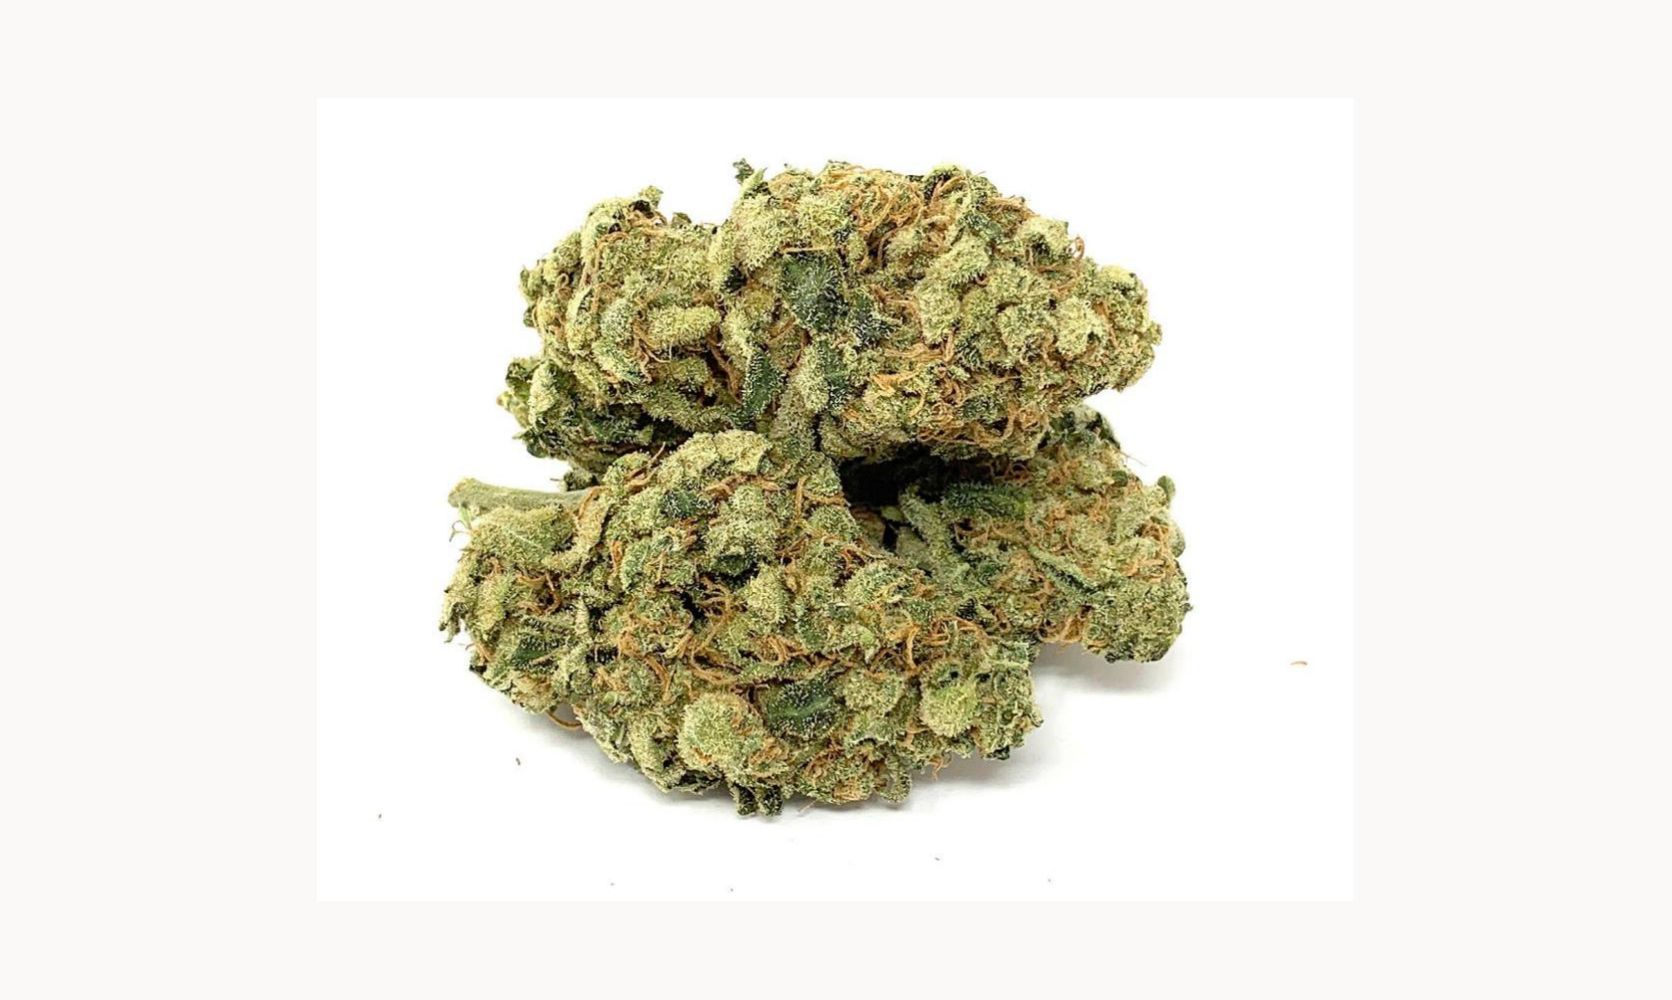 The Green Congo strain is a mild to moderate cannabis strain with around 17 to 18 percent of THC. Purchase this strain from Low Price Bud.